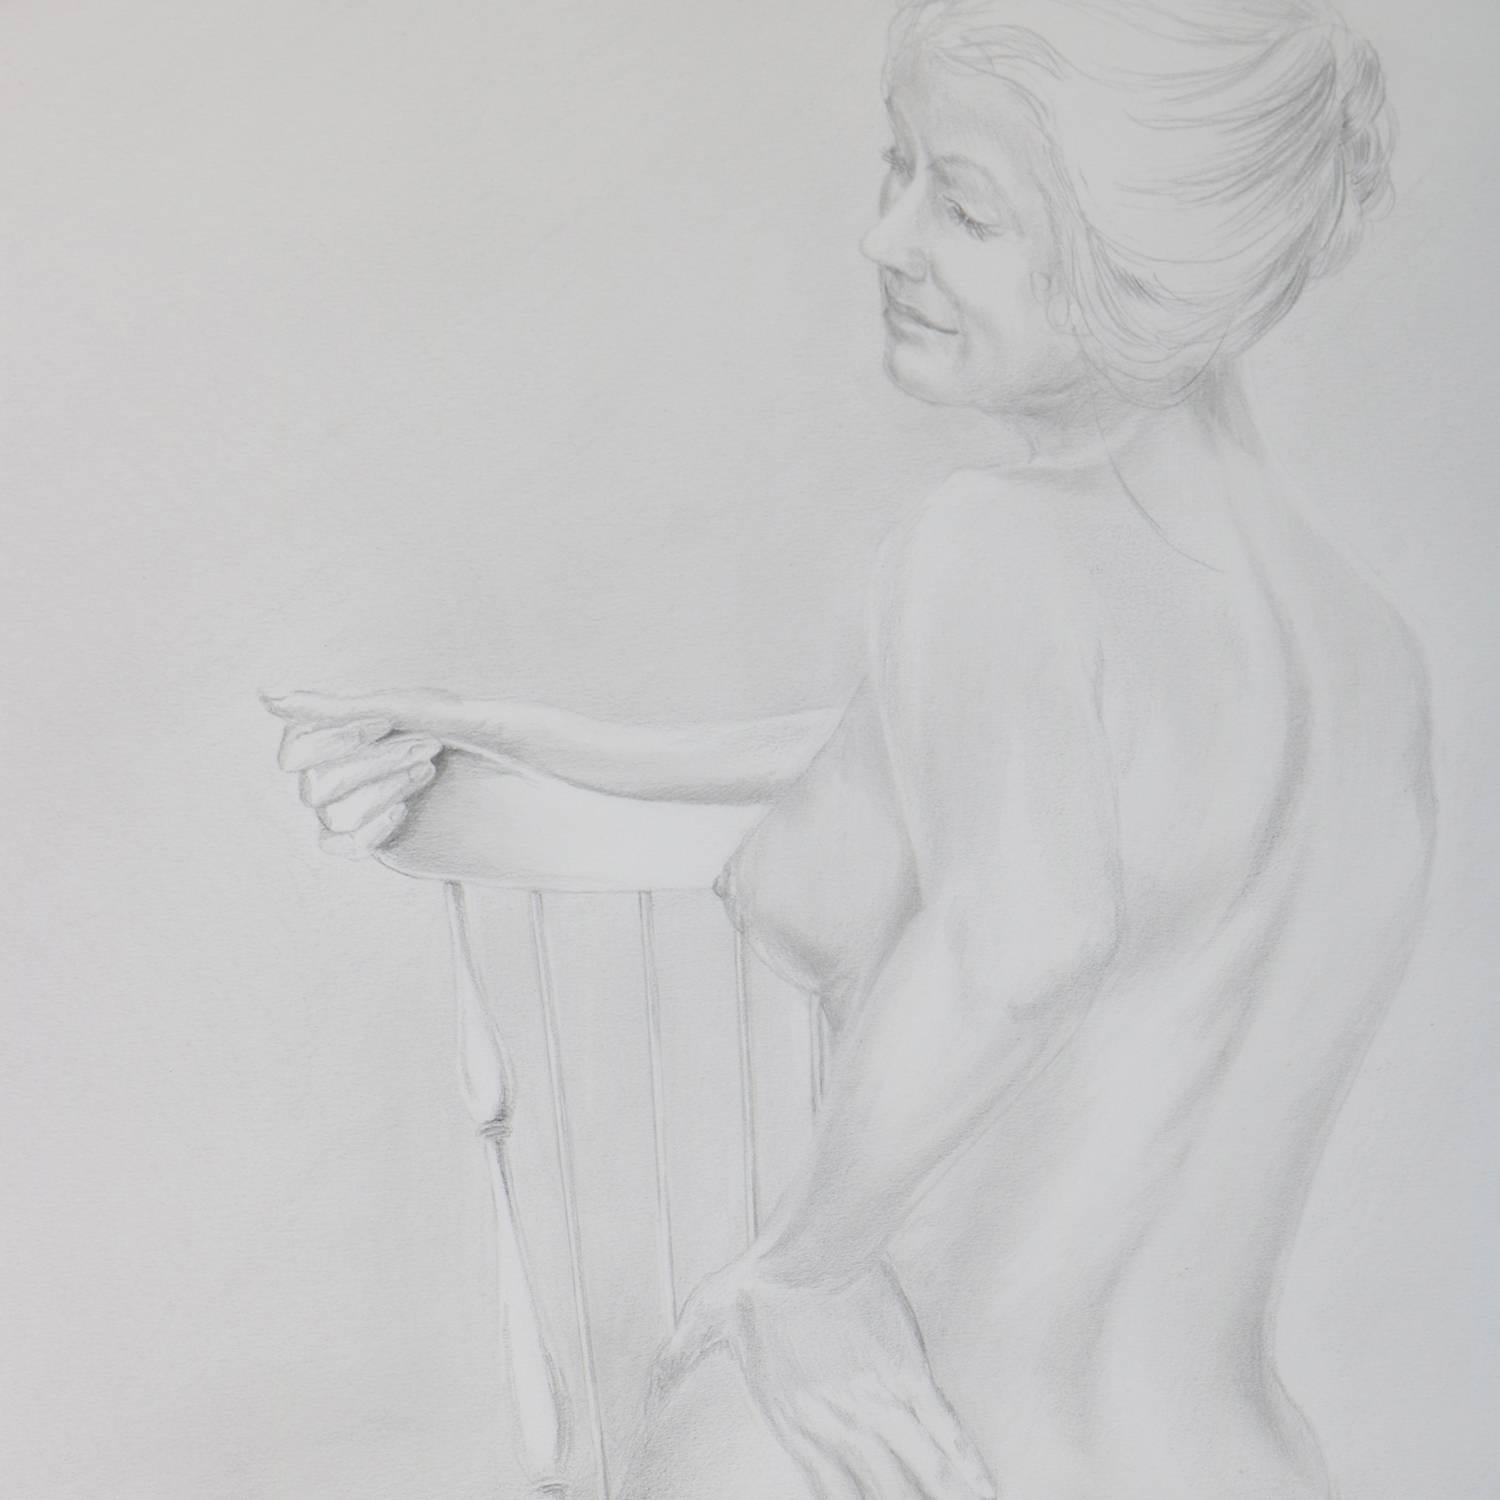 Mid-Century Modern graphite drawing by David Hanna (United States, 1941 - 1981) depicts portrait of seated nude female, pencil signed lower right David Hanna, framed and matted, circa 1970

***DELIVERY NOTICE – Due to COVID-19 we are employing